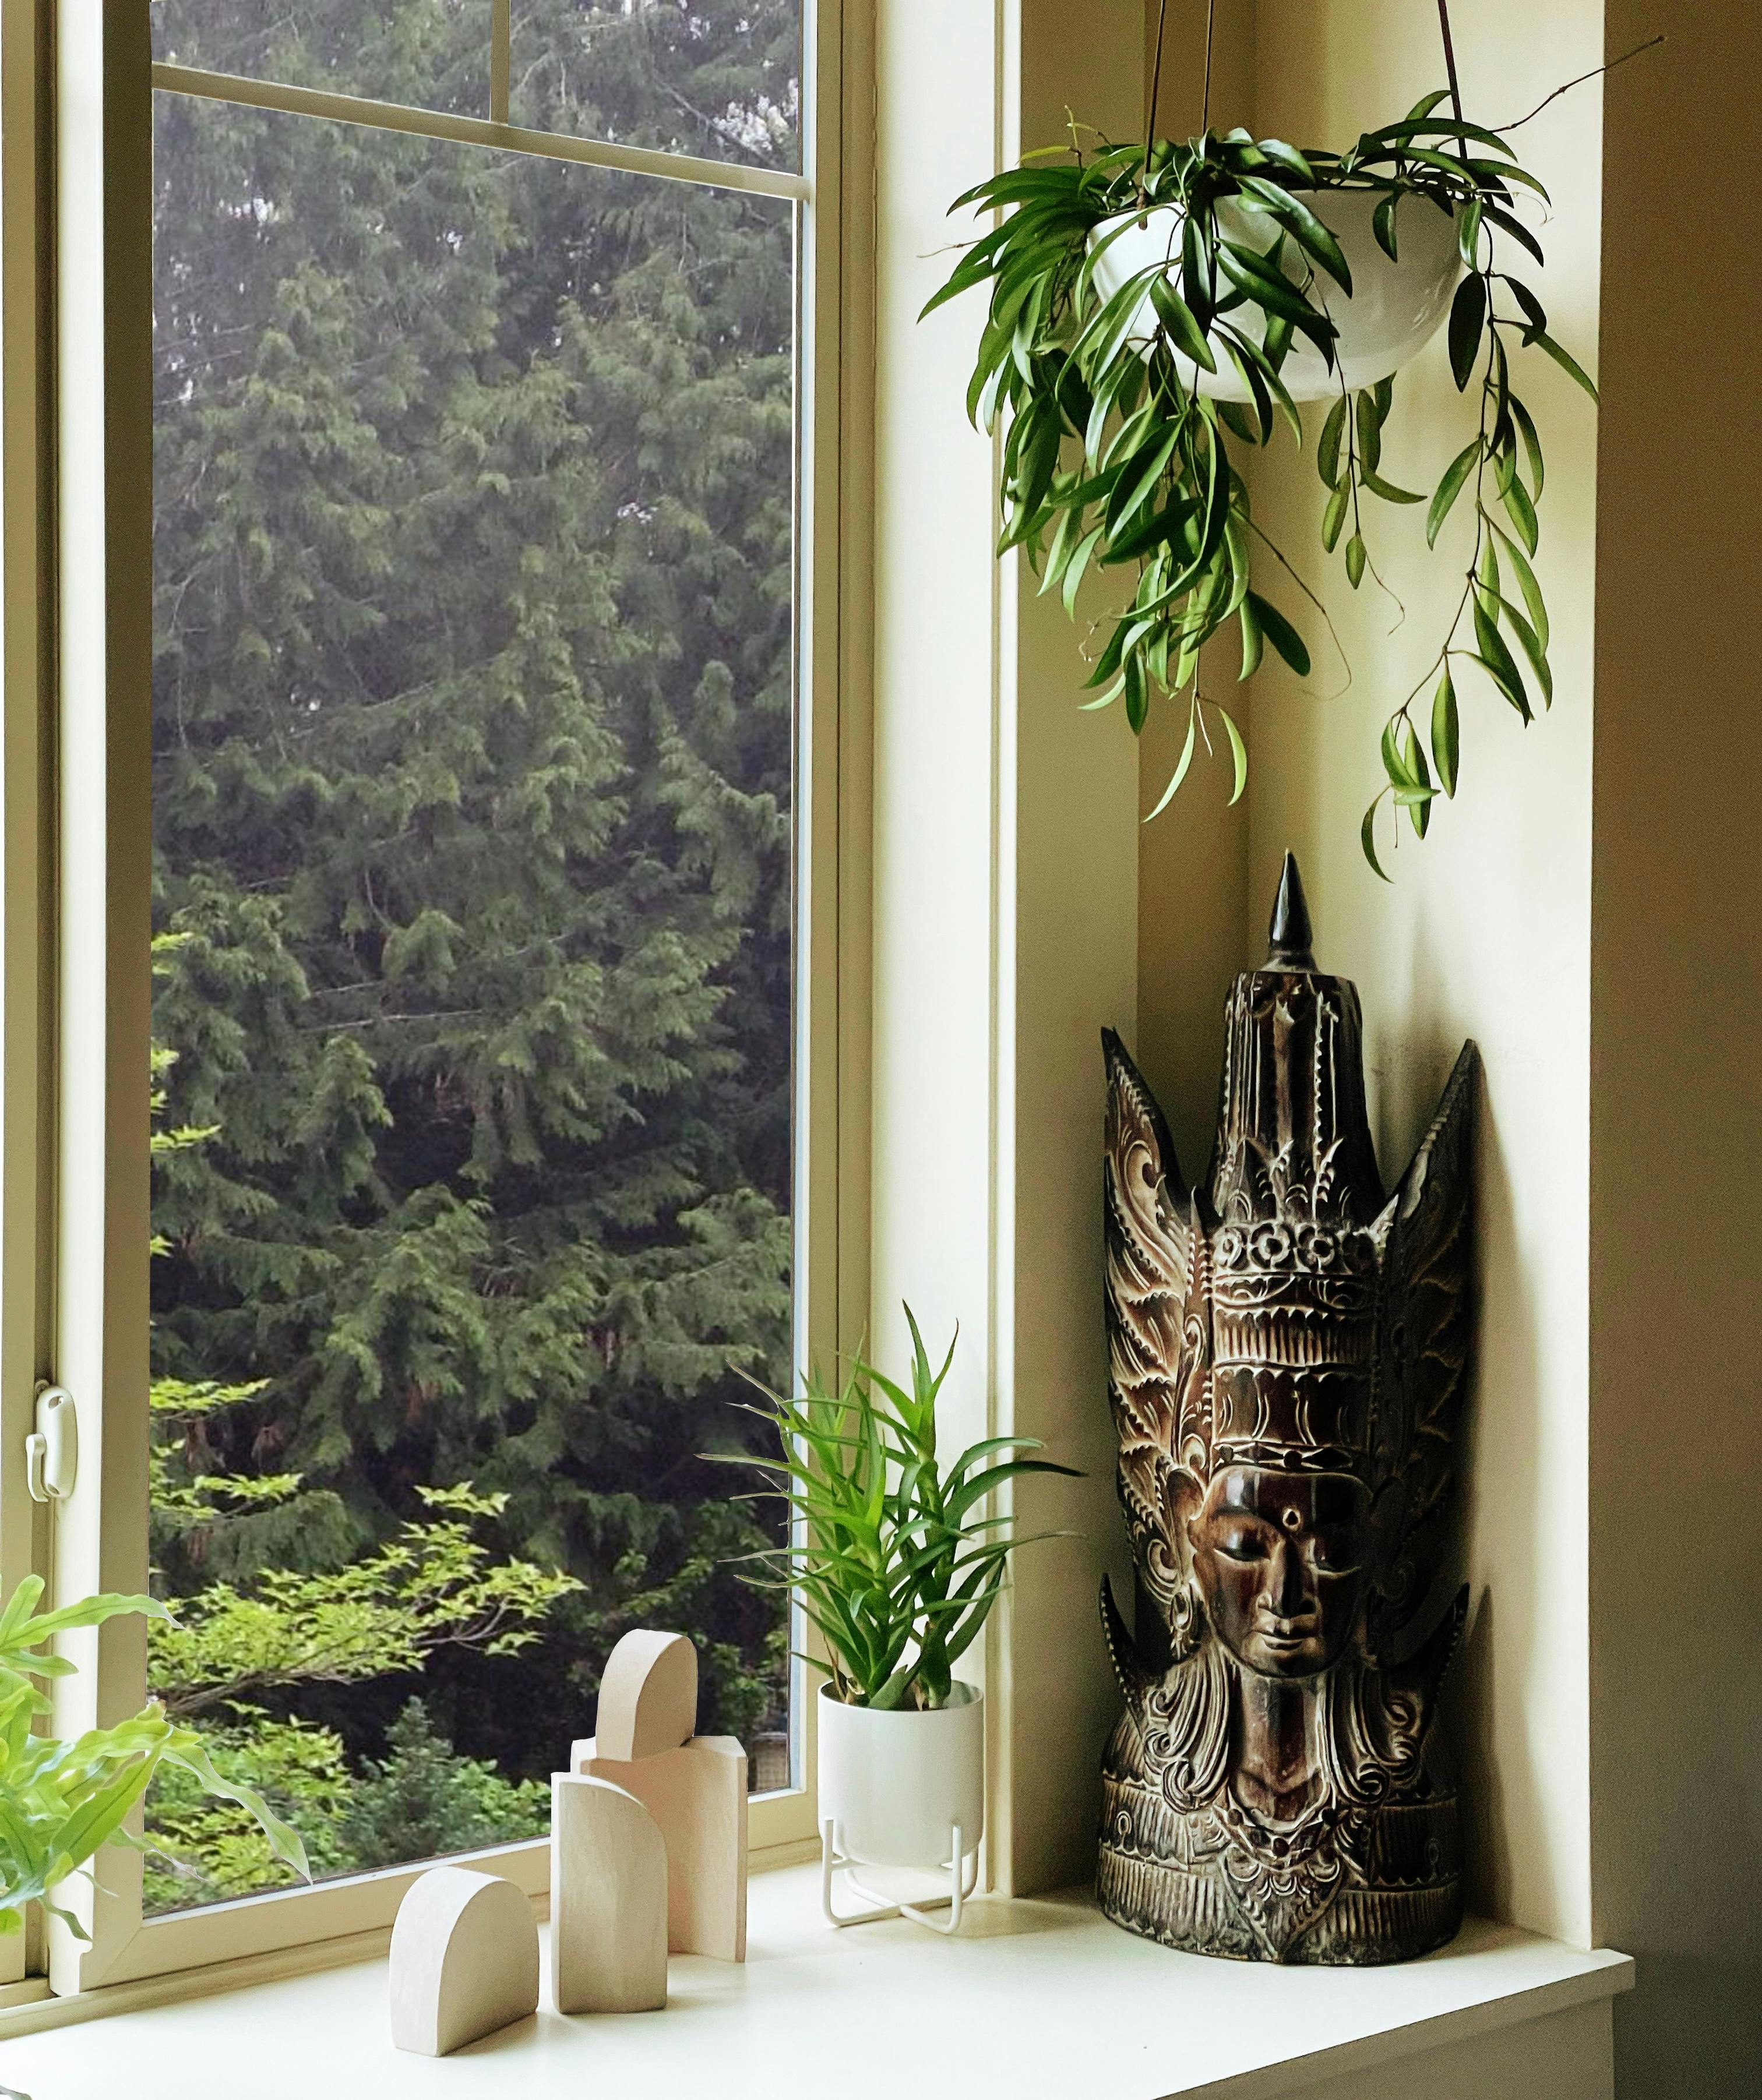 Greenery adorns a window seat designed by Persimmon Design